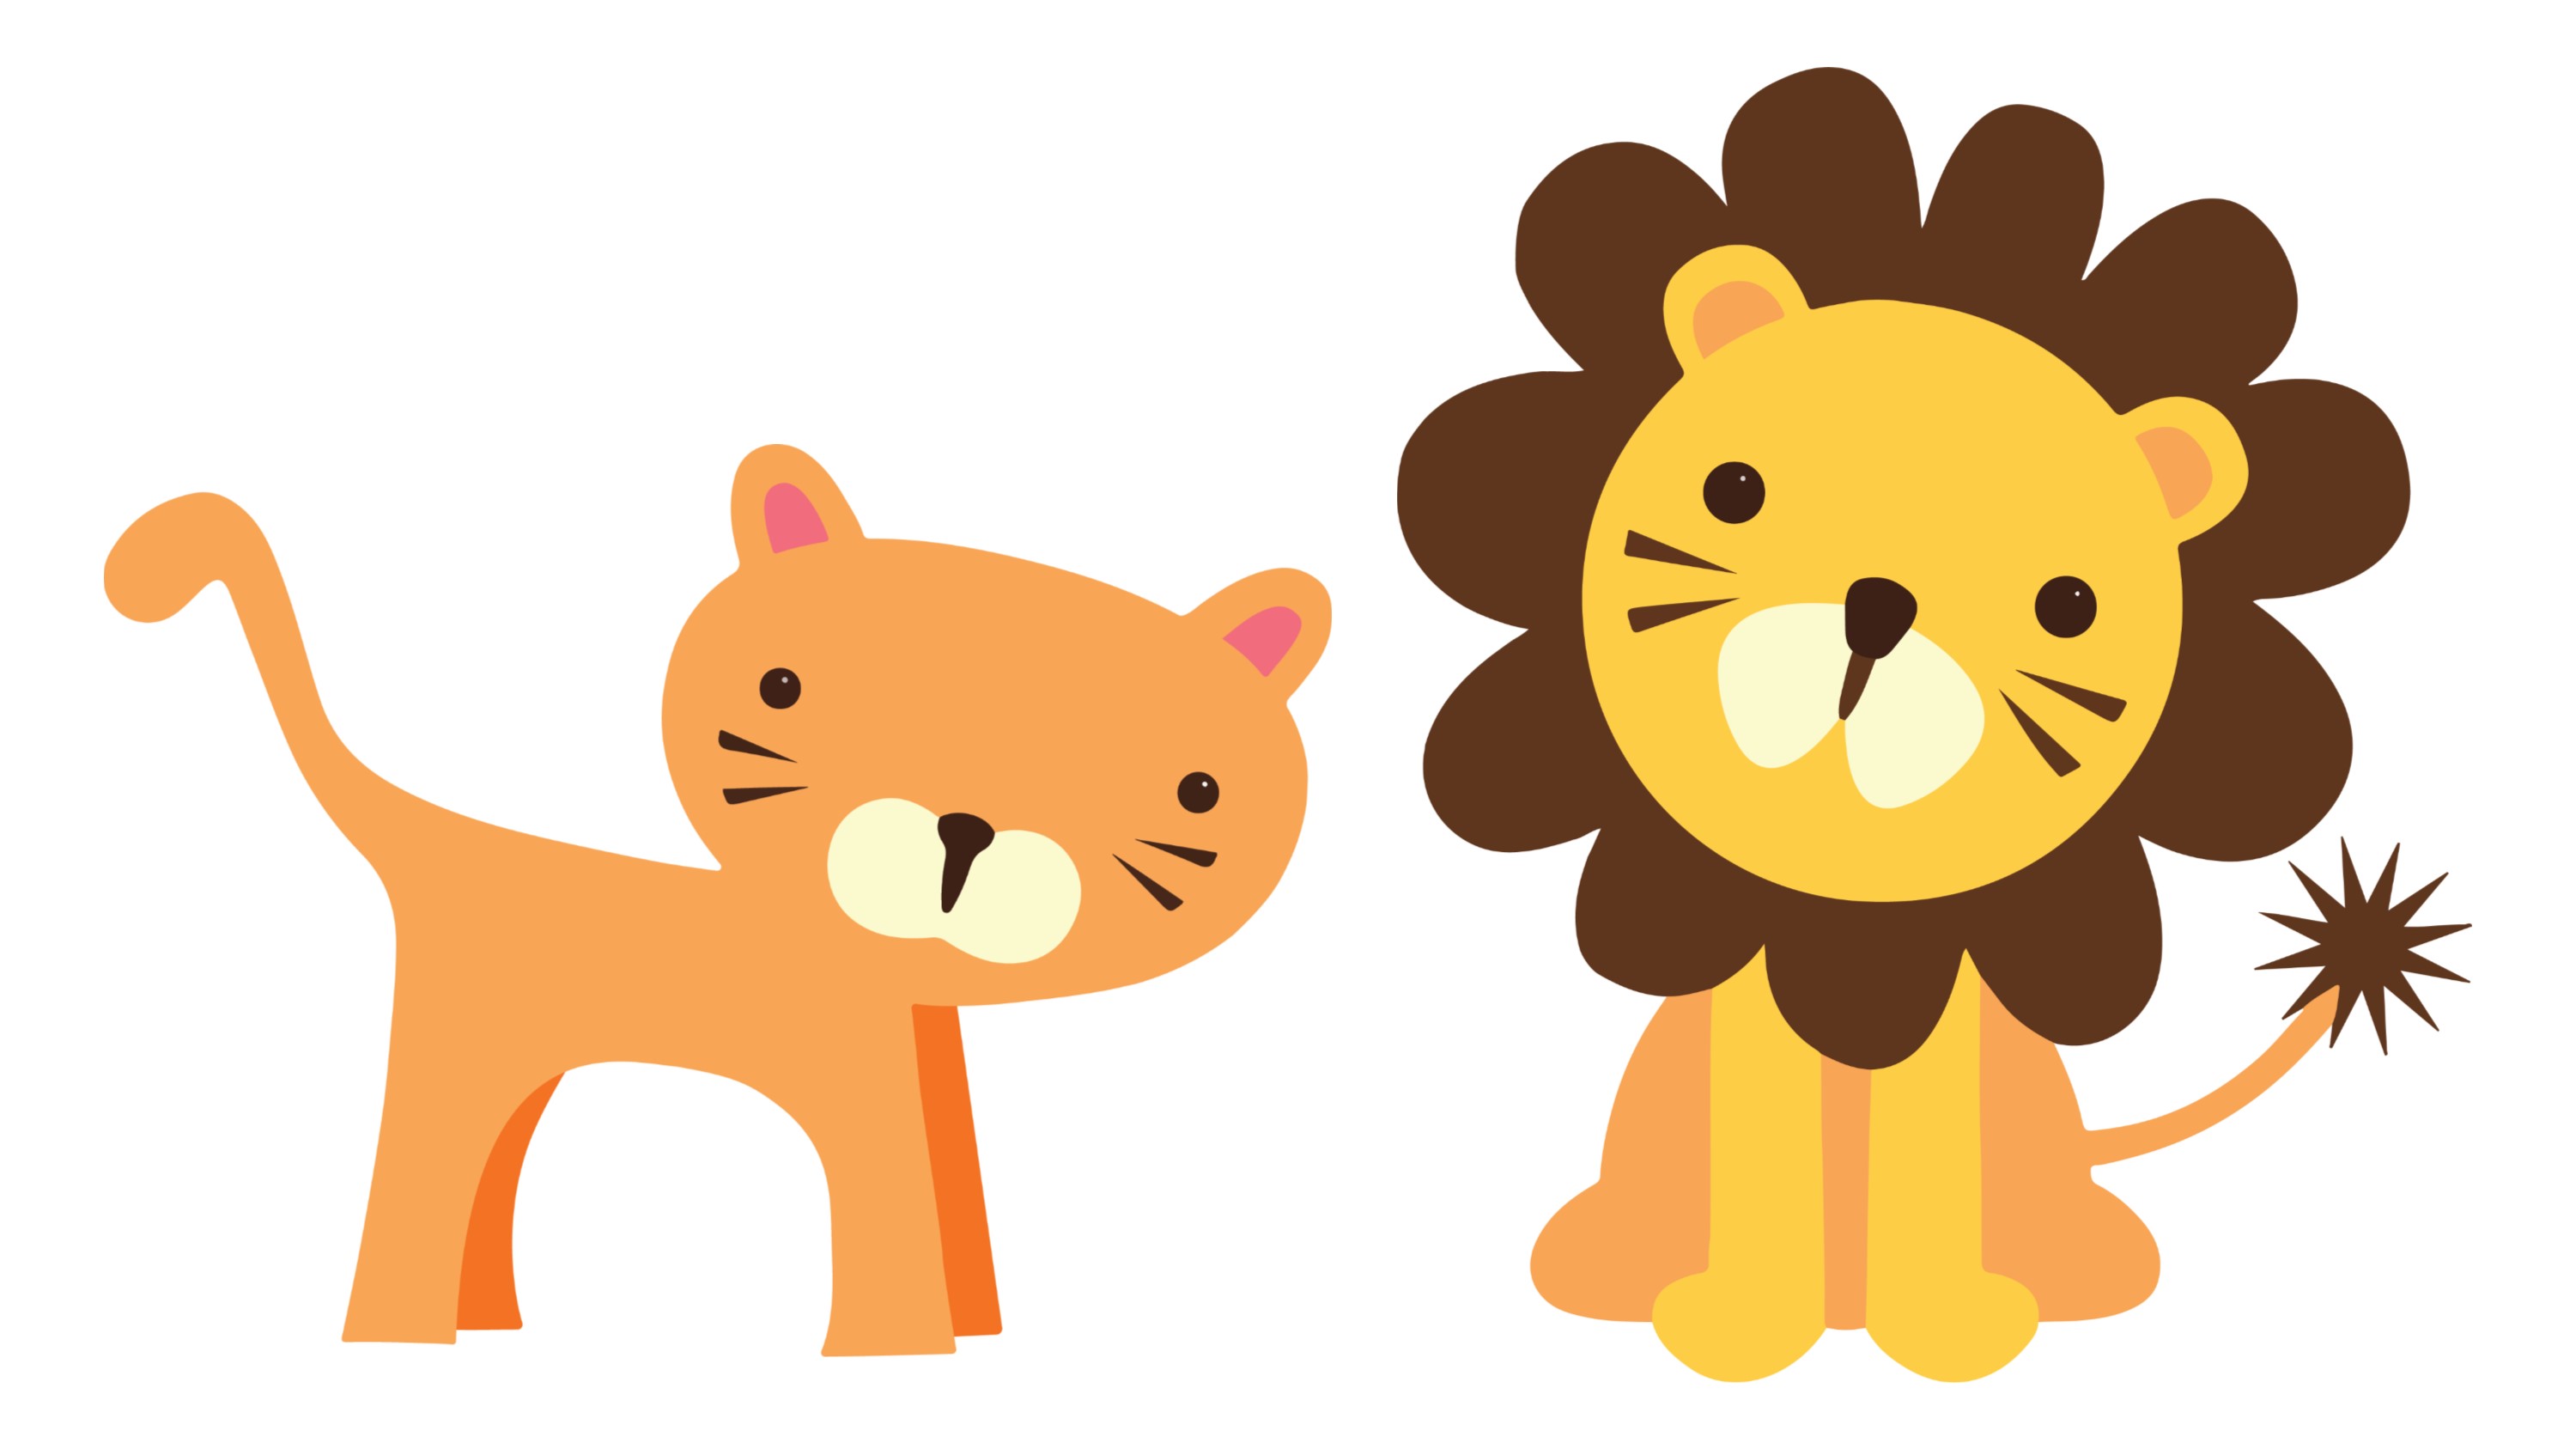 Toy tiger and lion on white background